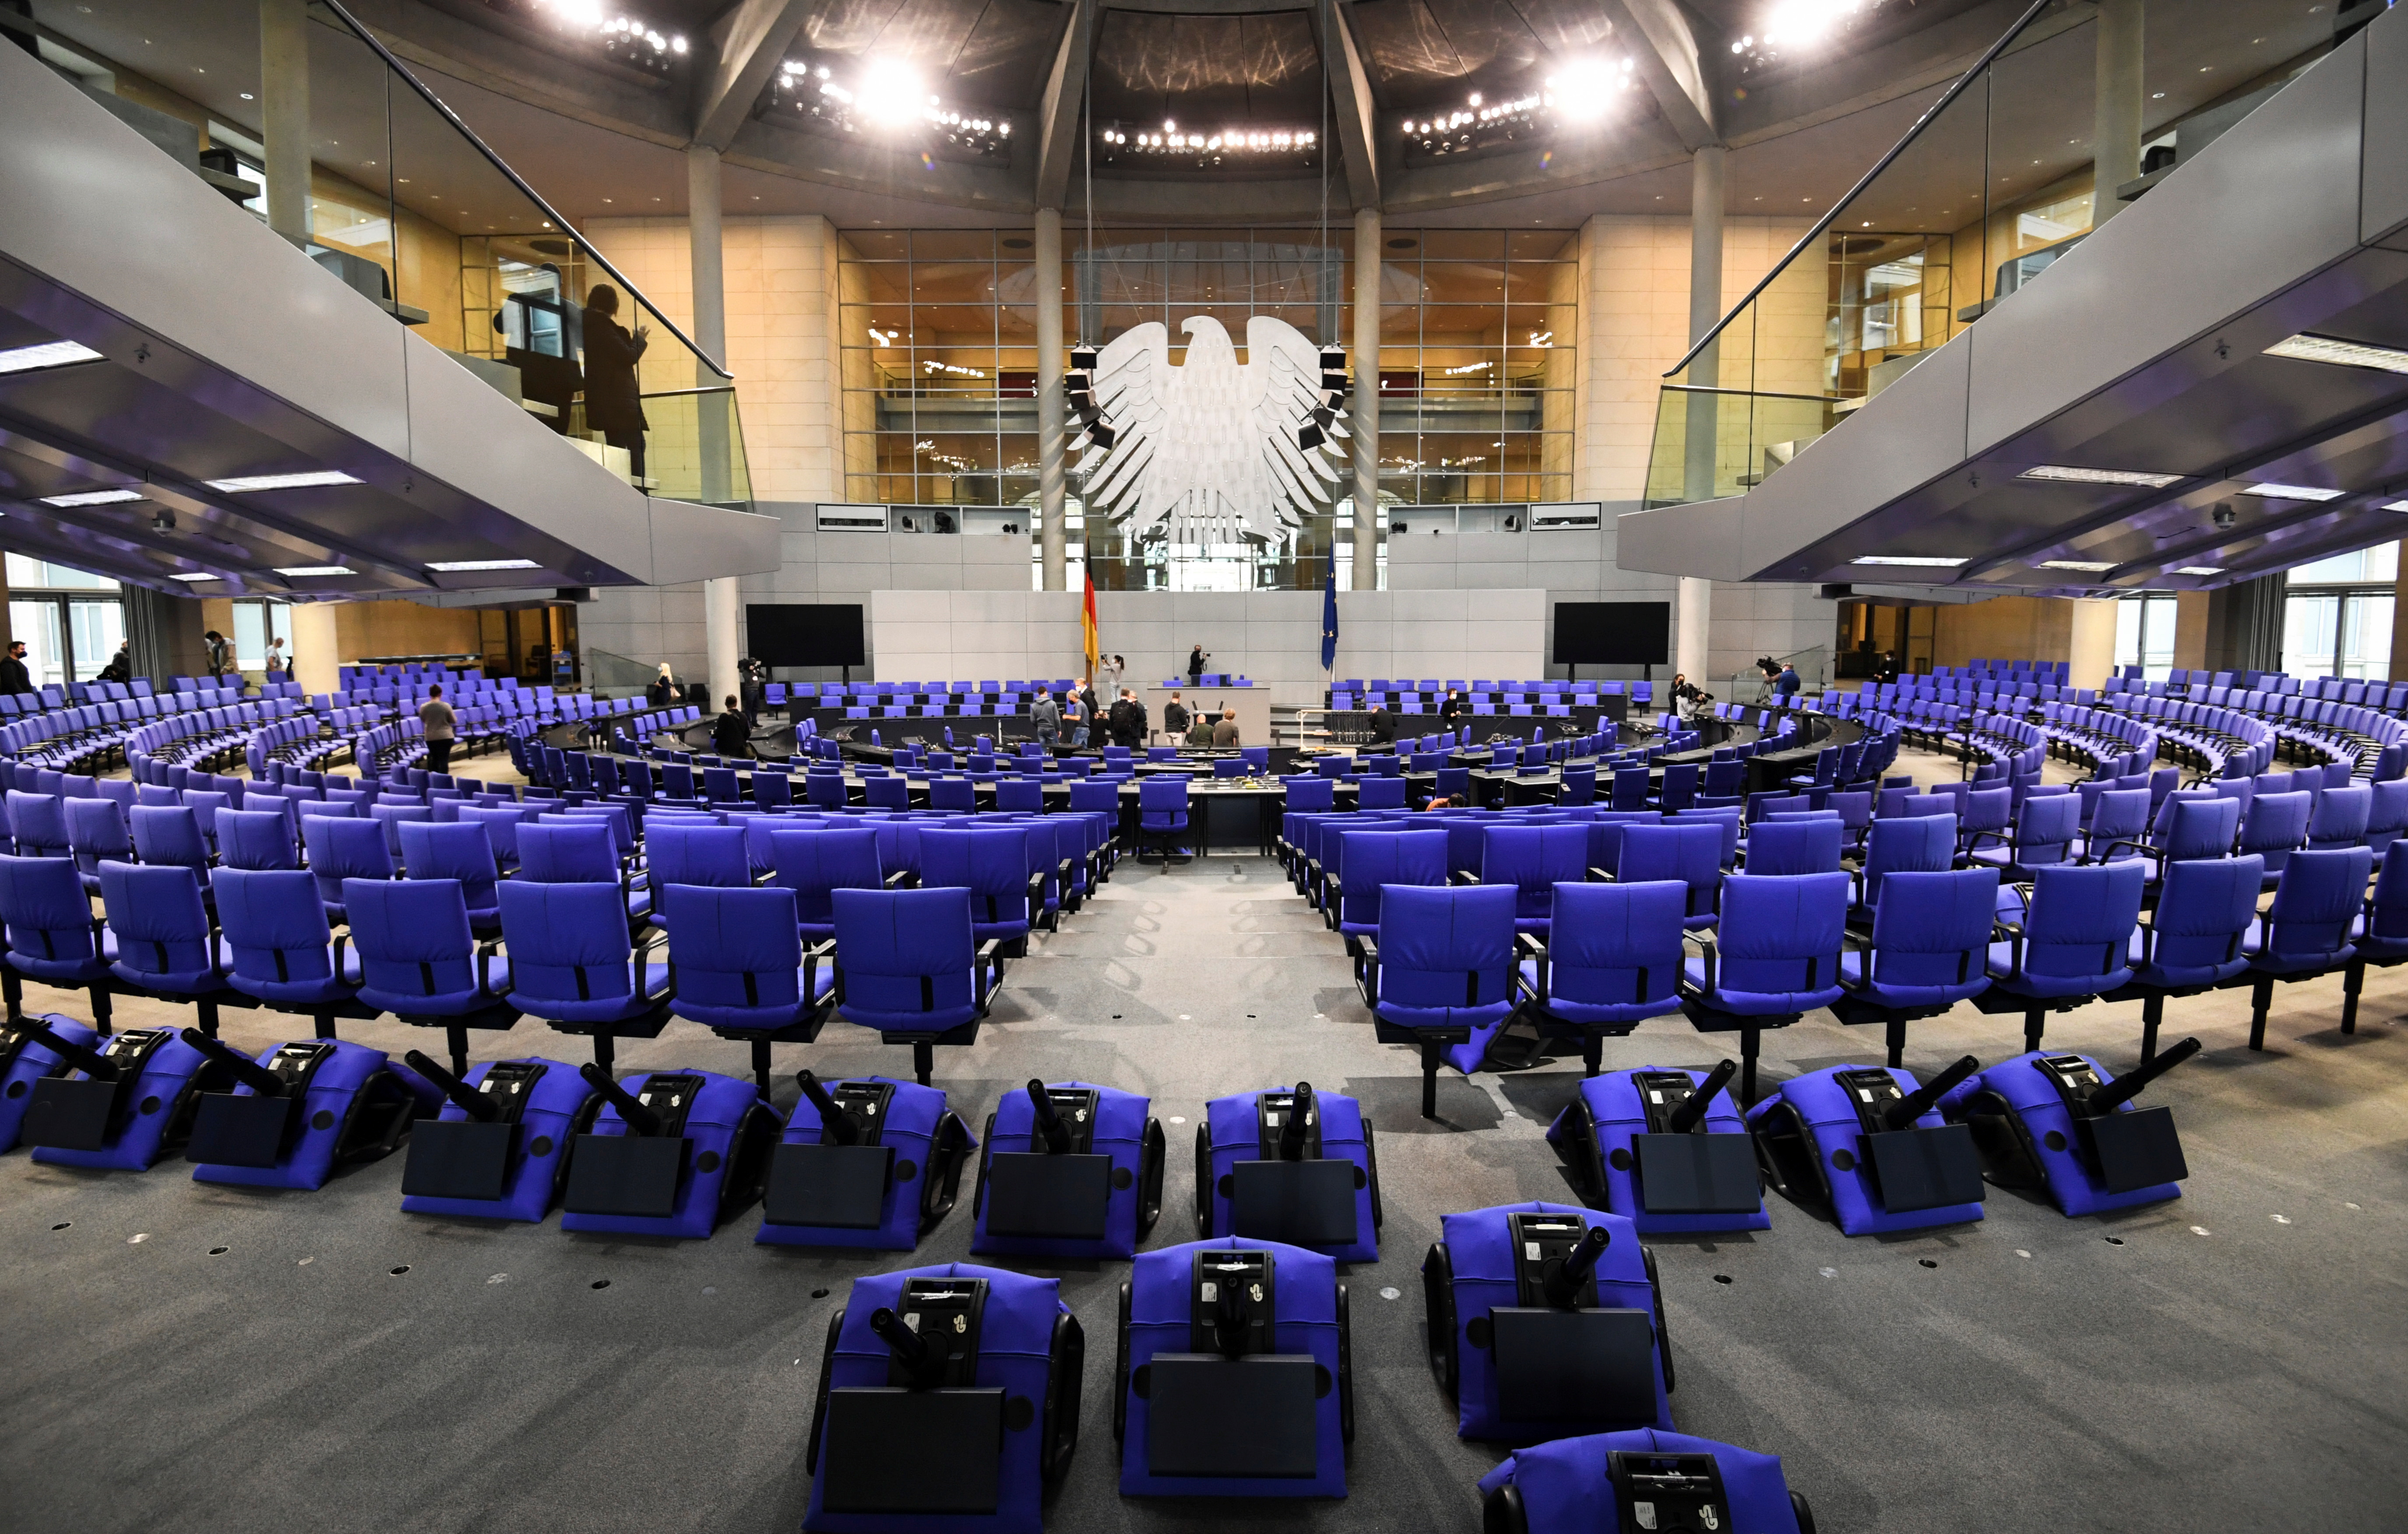 Plenary hall of the Bundestag is prepared for the upcoming first plenum session after general election in Berlin